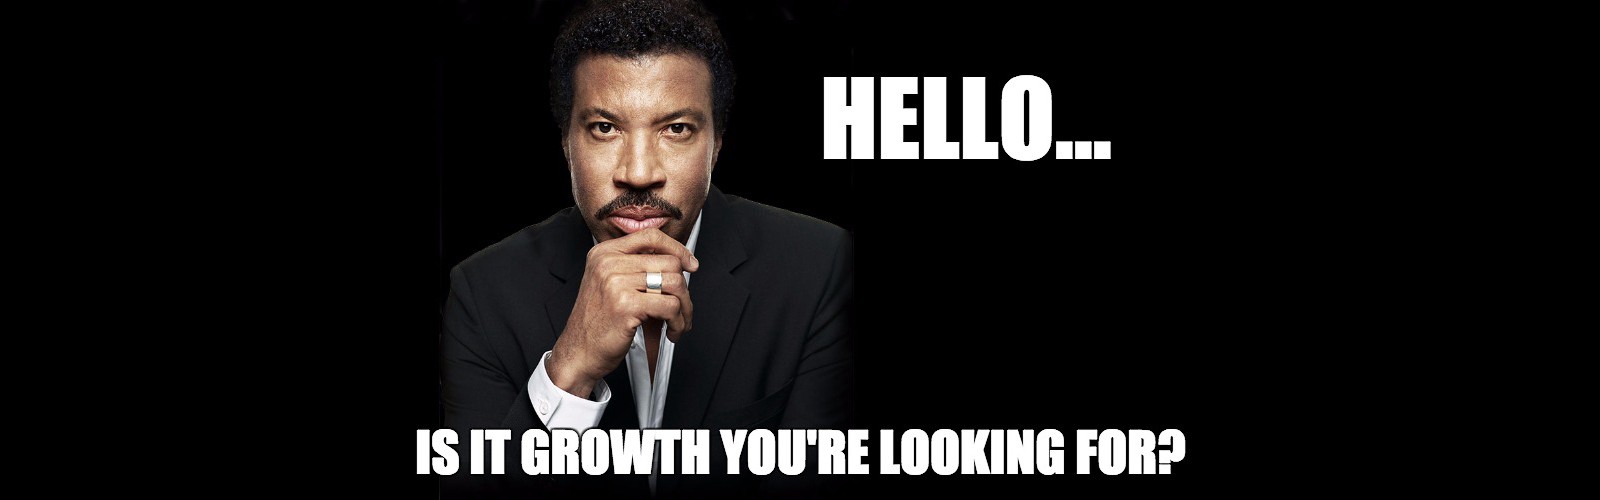 hello, is it growth you're looking for?